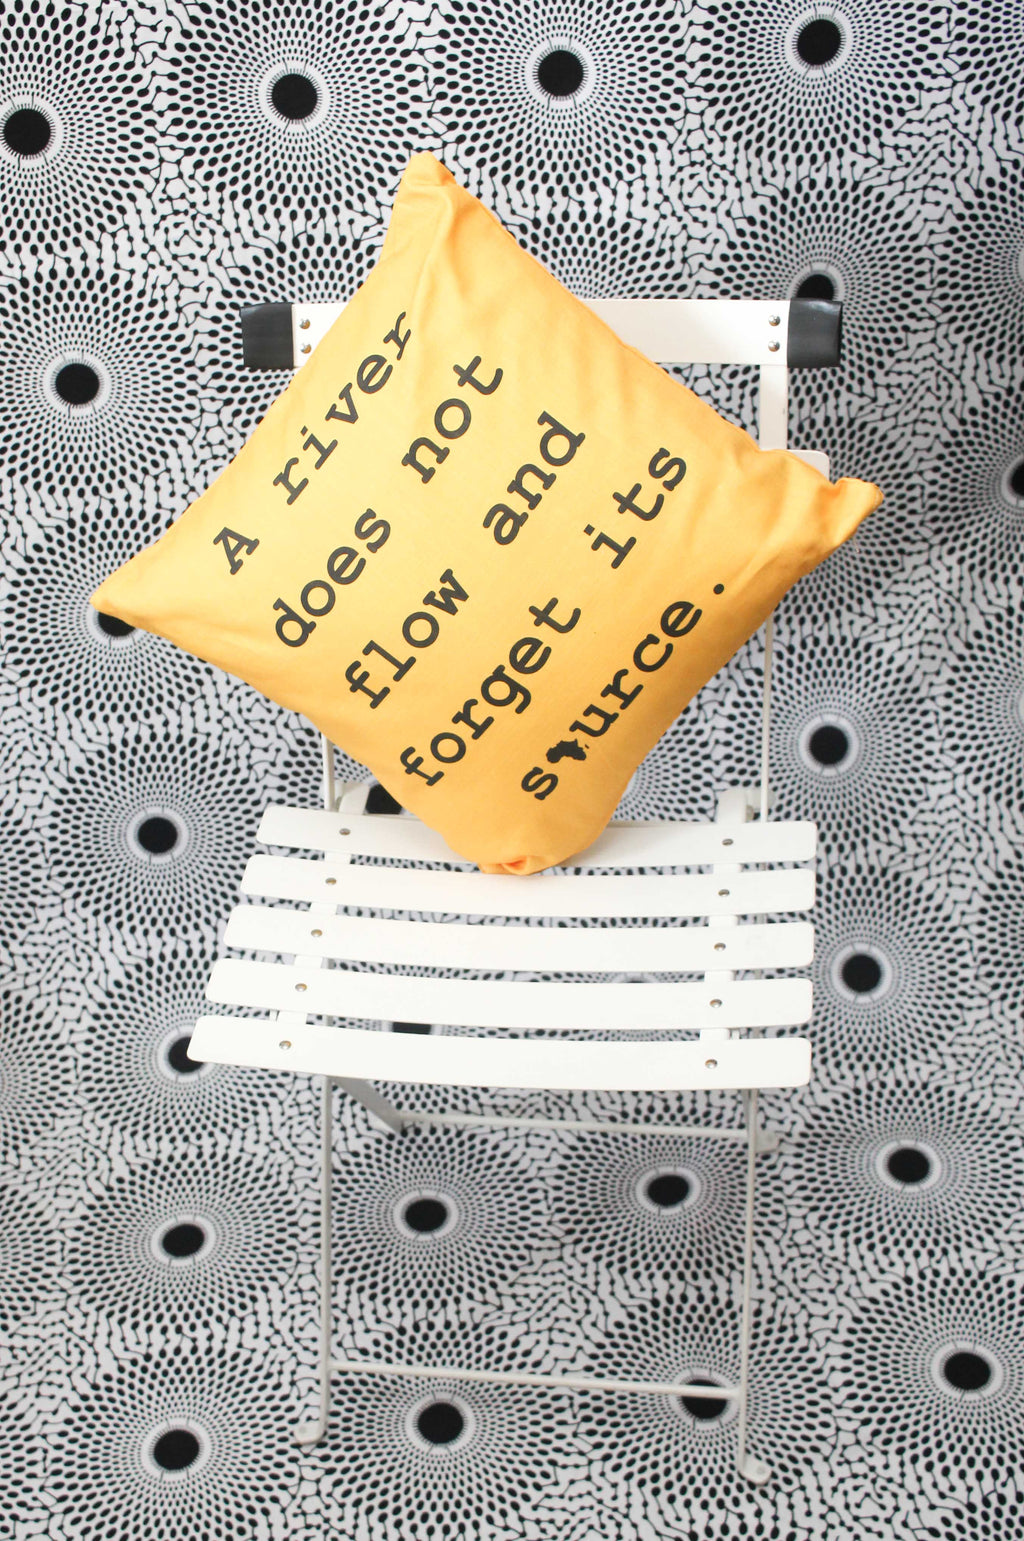 Yoruba Proverb Art Cushion: ‘A river does not flow and forgets its source’